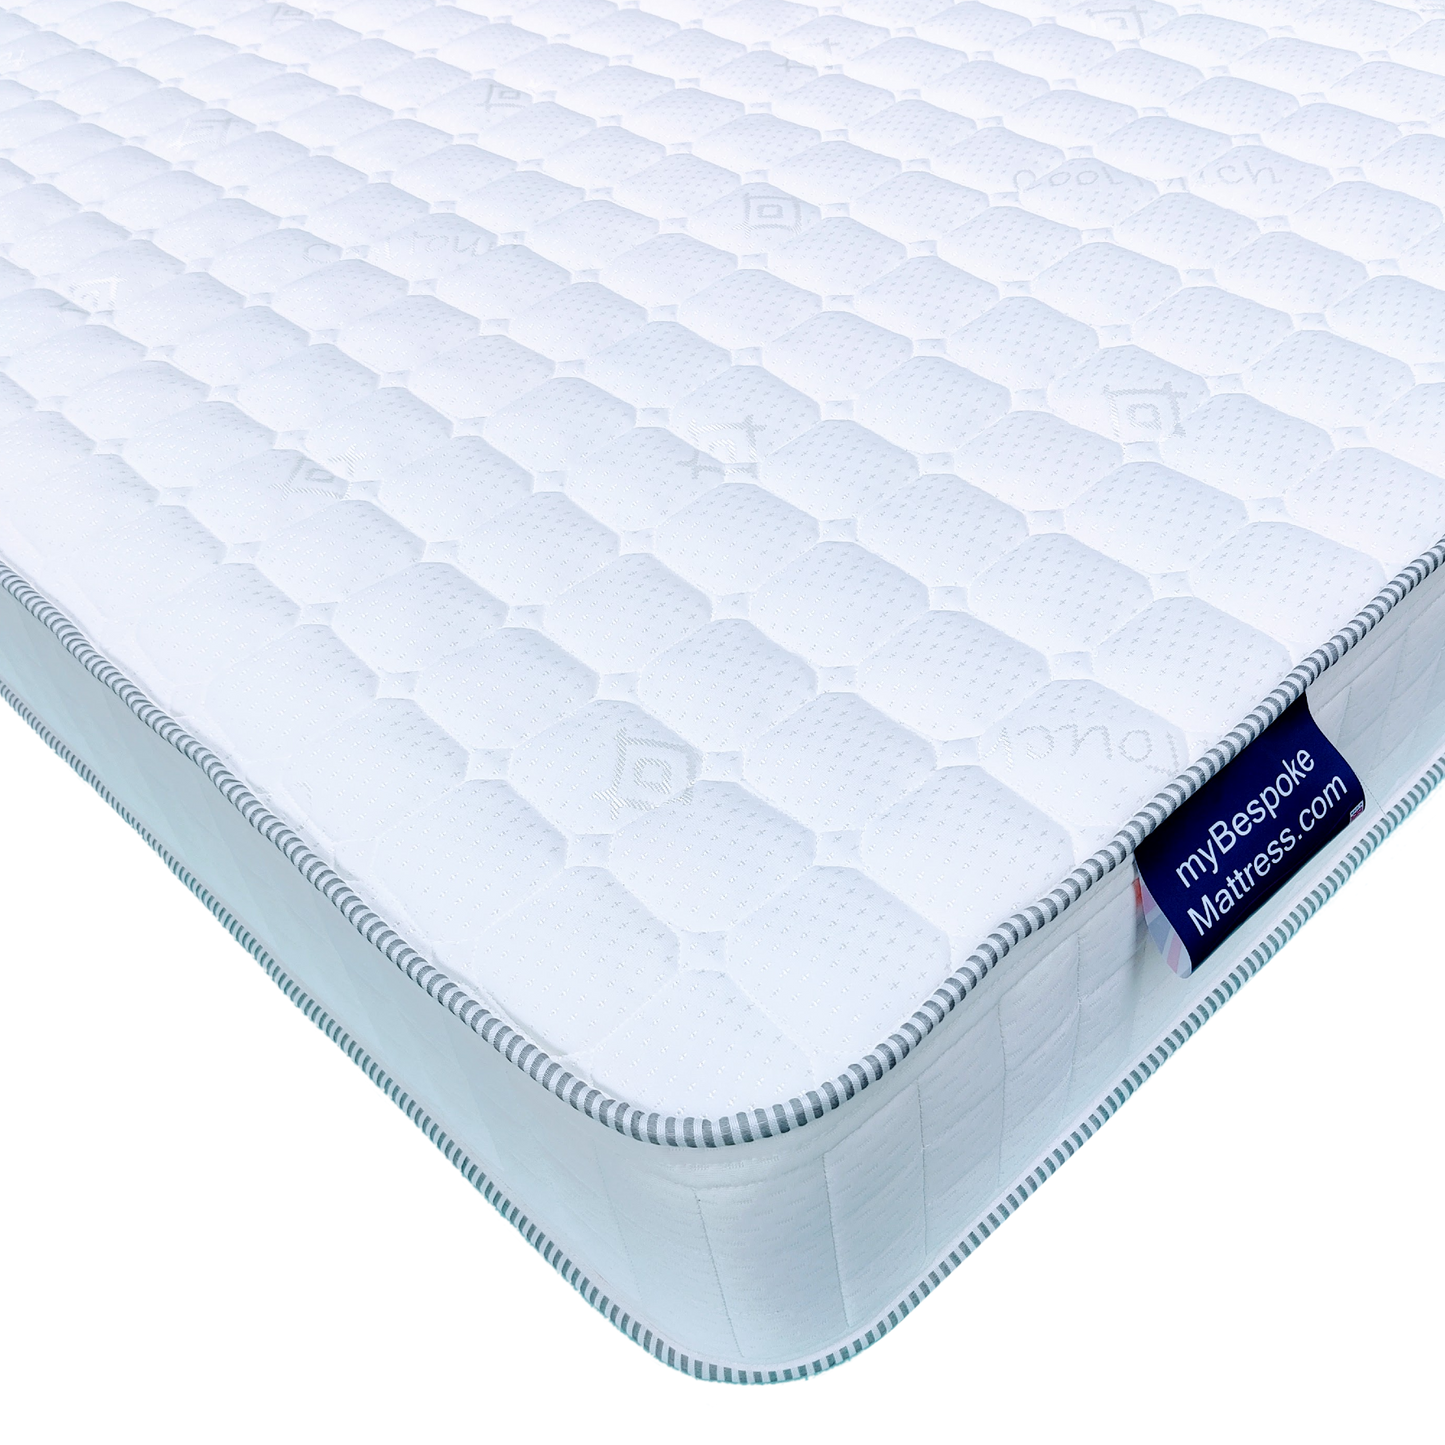 Regular Mattress - Available in Single, Double, King, and Custom Lengths